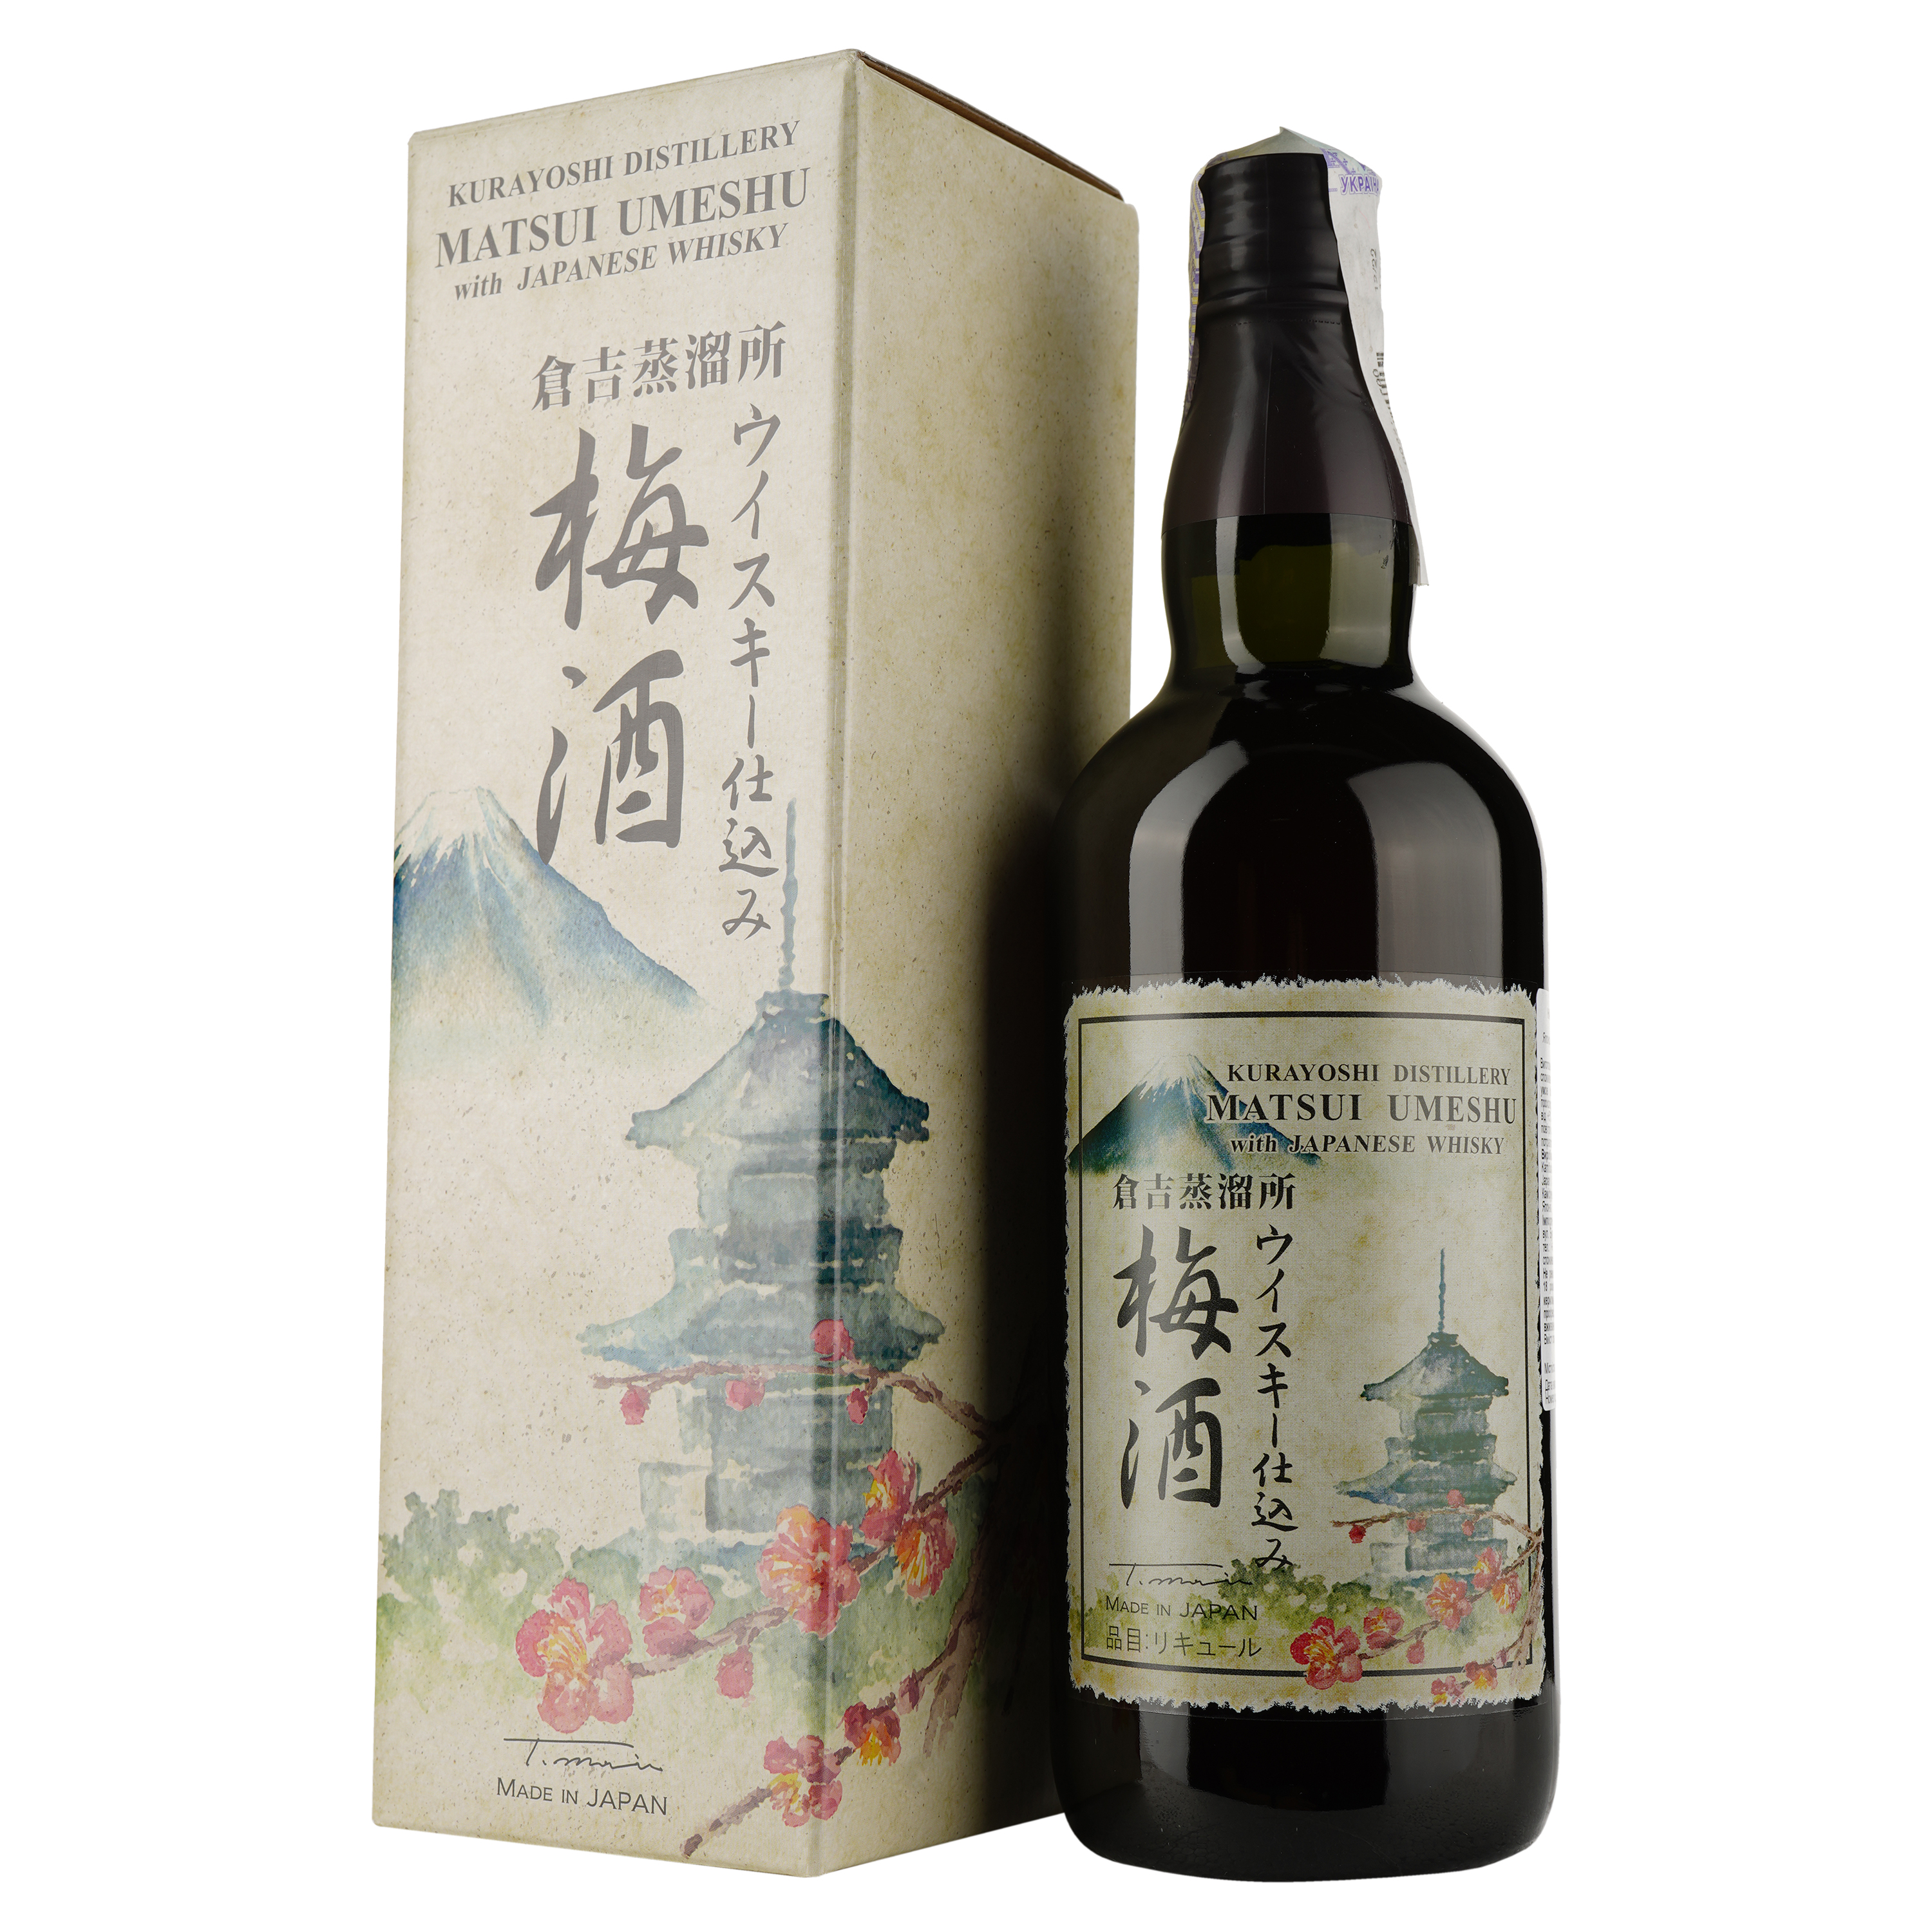 Лікер Matsui Umeshu Blended with Japanese Whisky 14% 0.7 л - фото 1